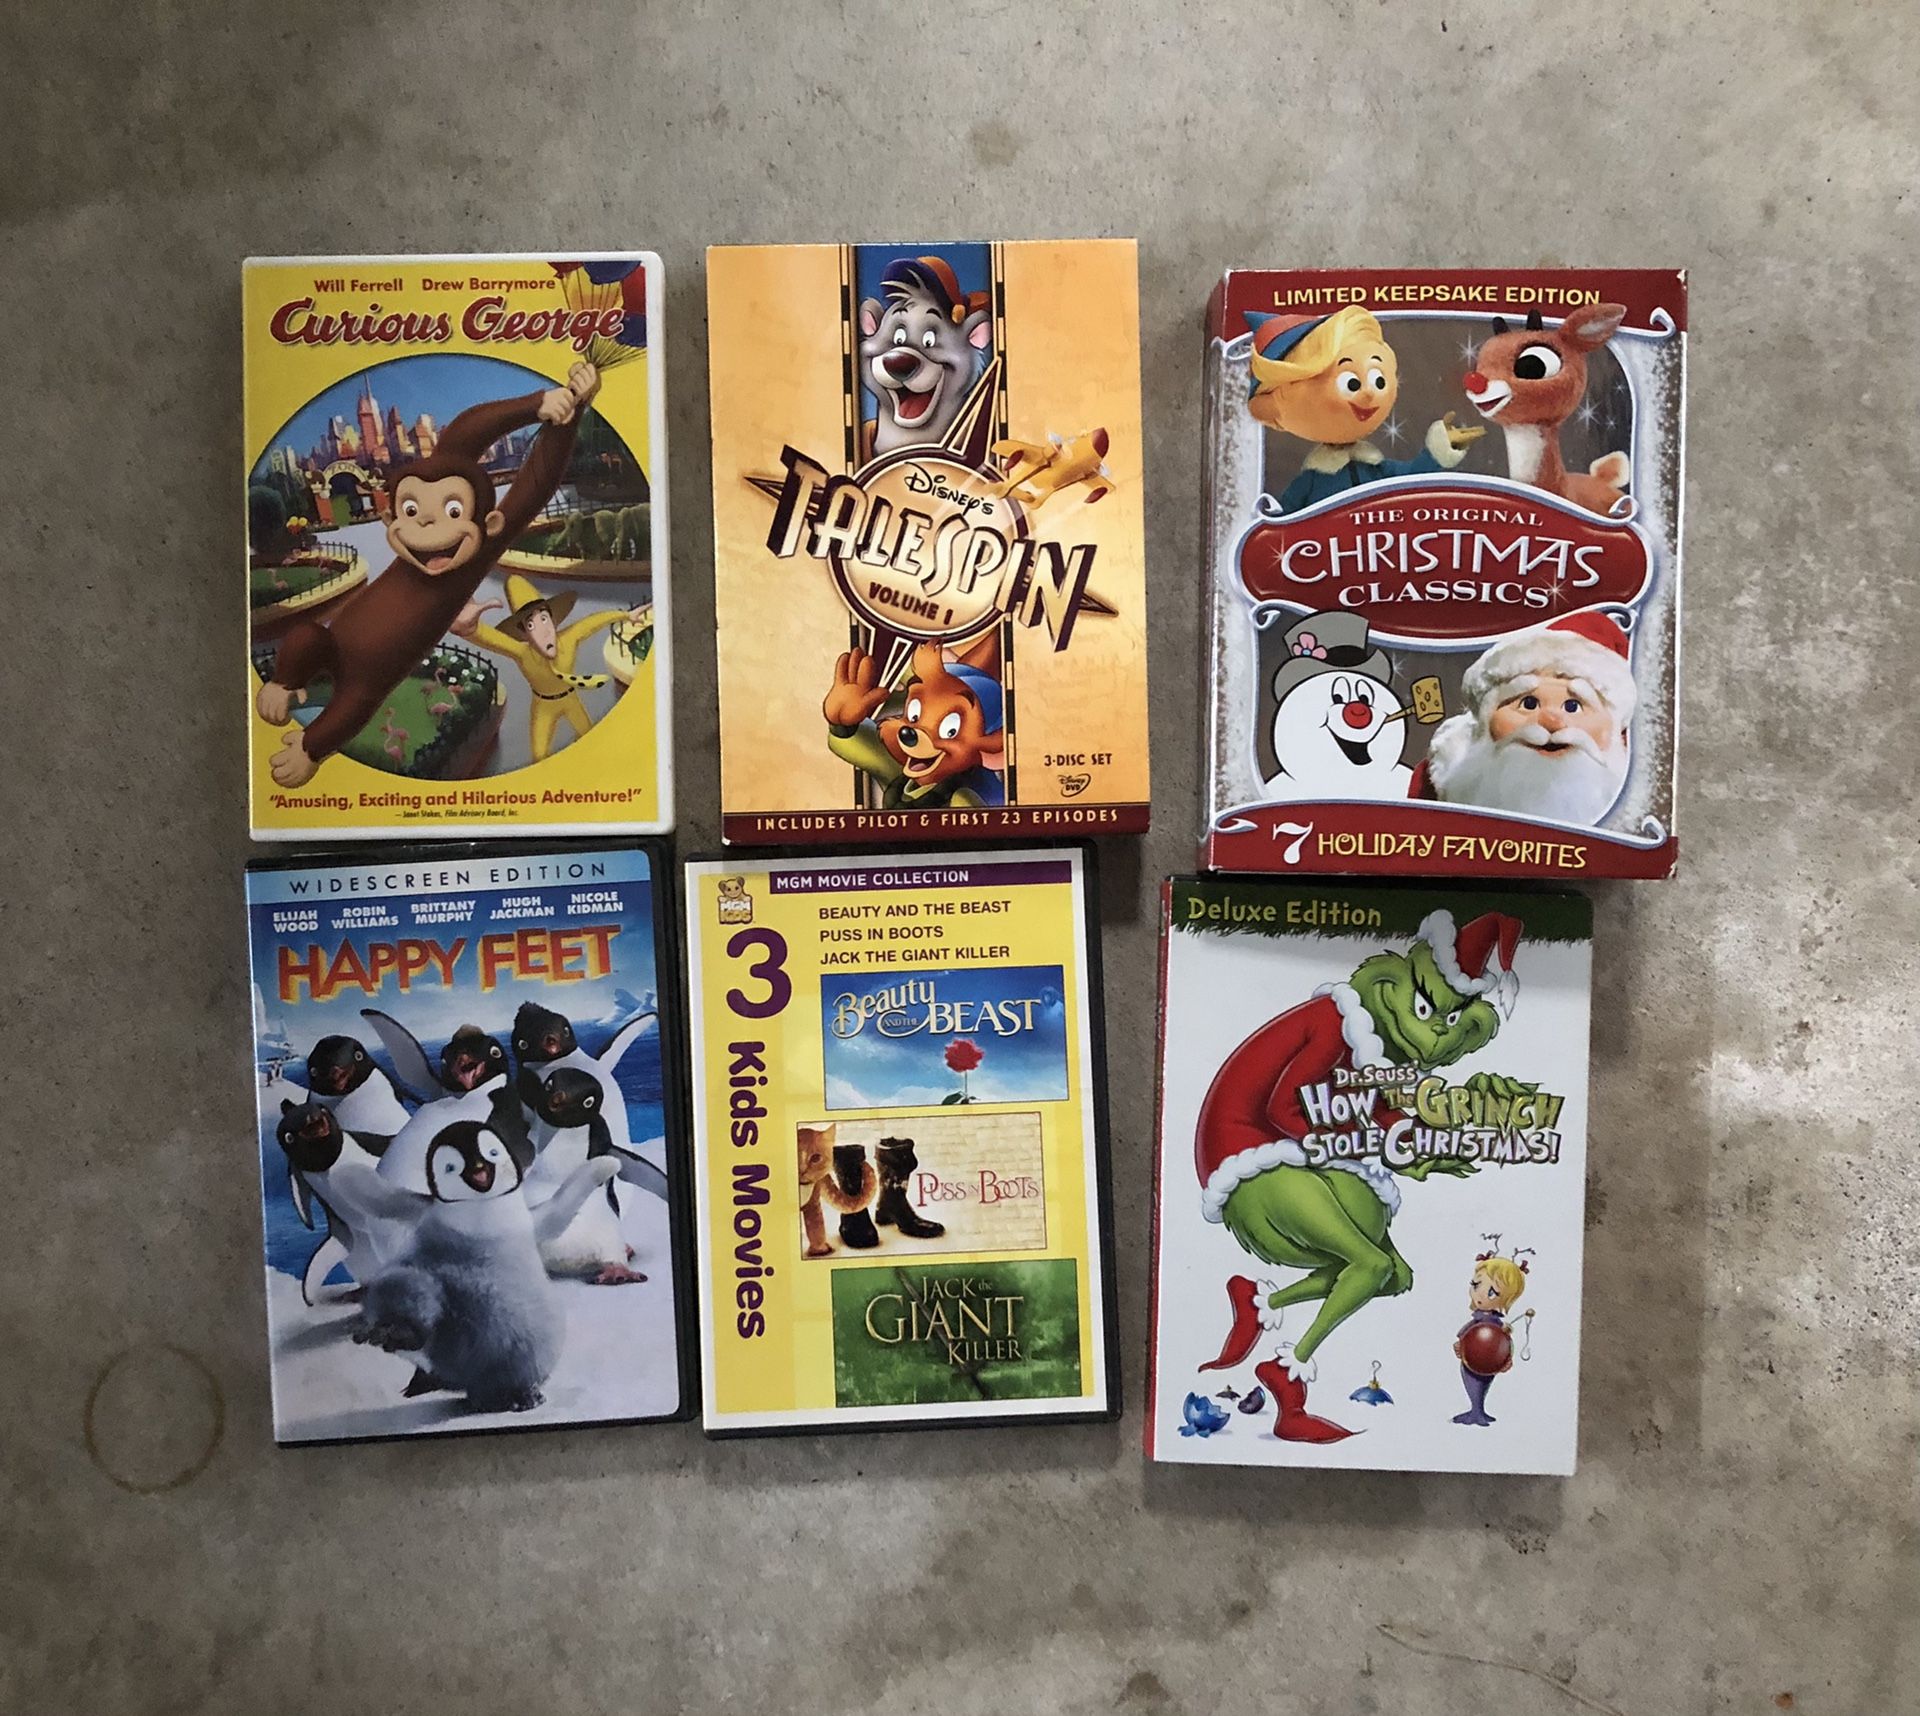 12 DVD movies/shows for kids